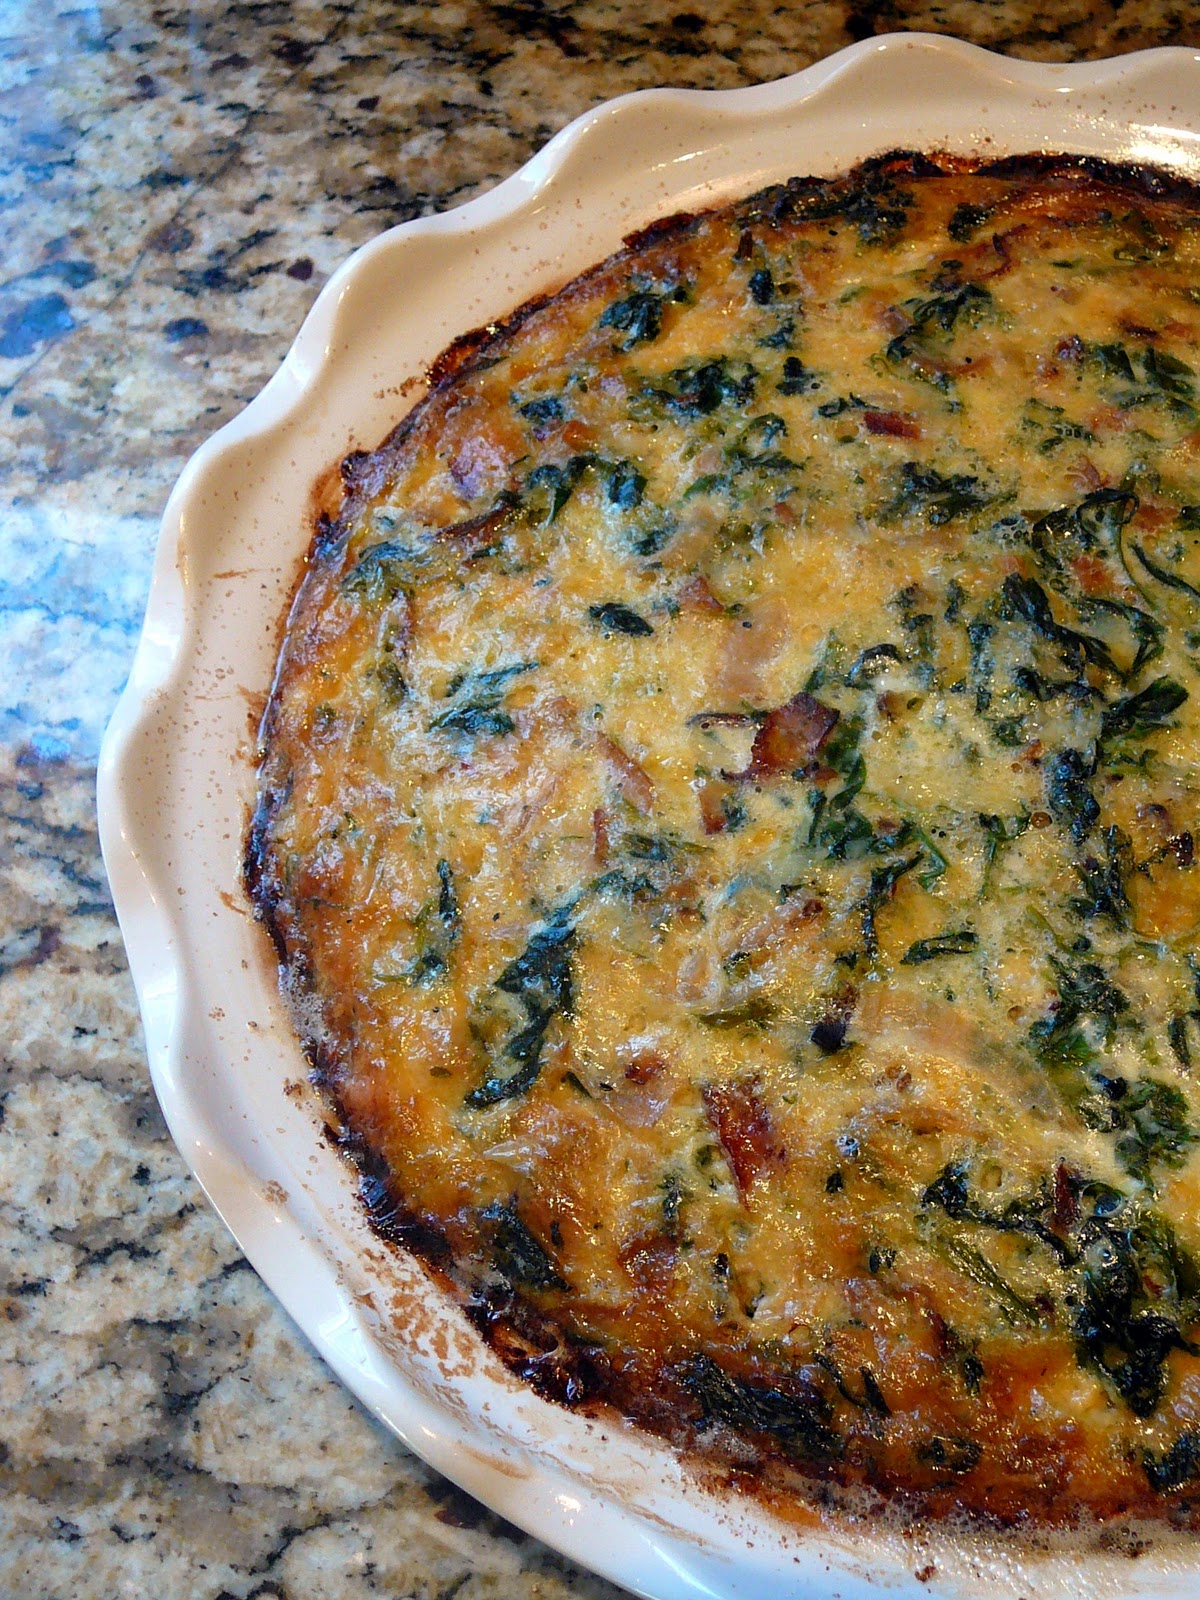 Bentobloggy: Turkey & Spinach Quiche with Caramelized Onions